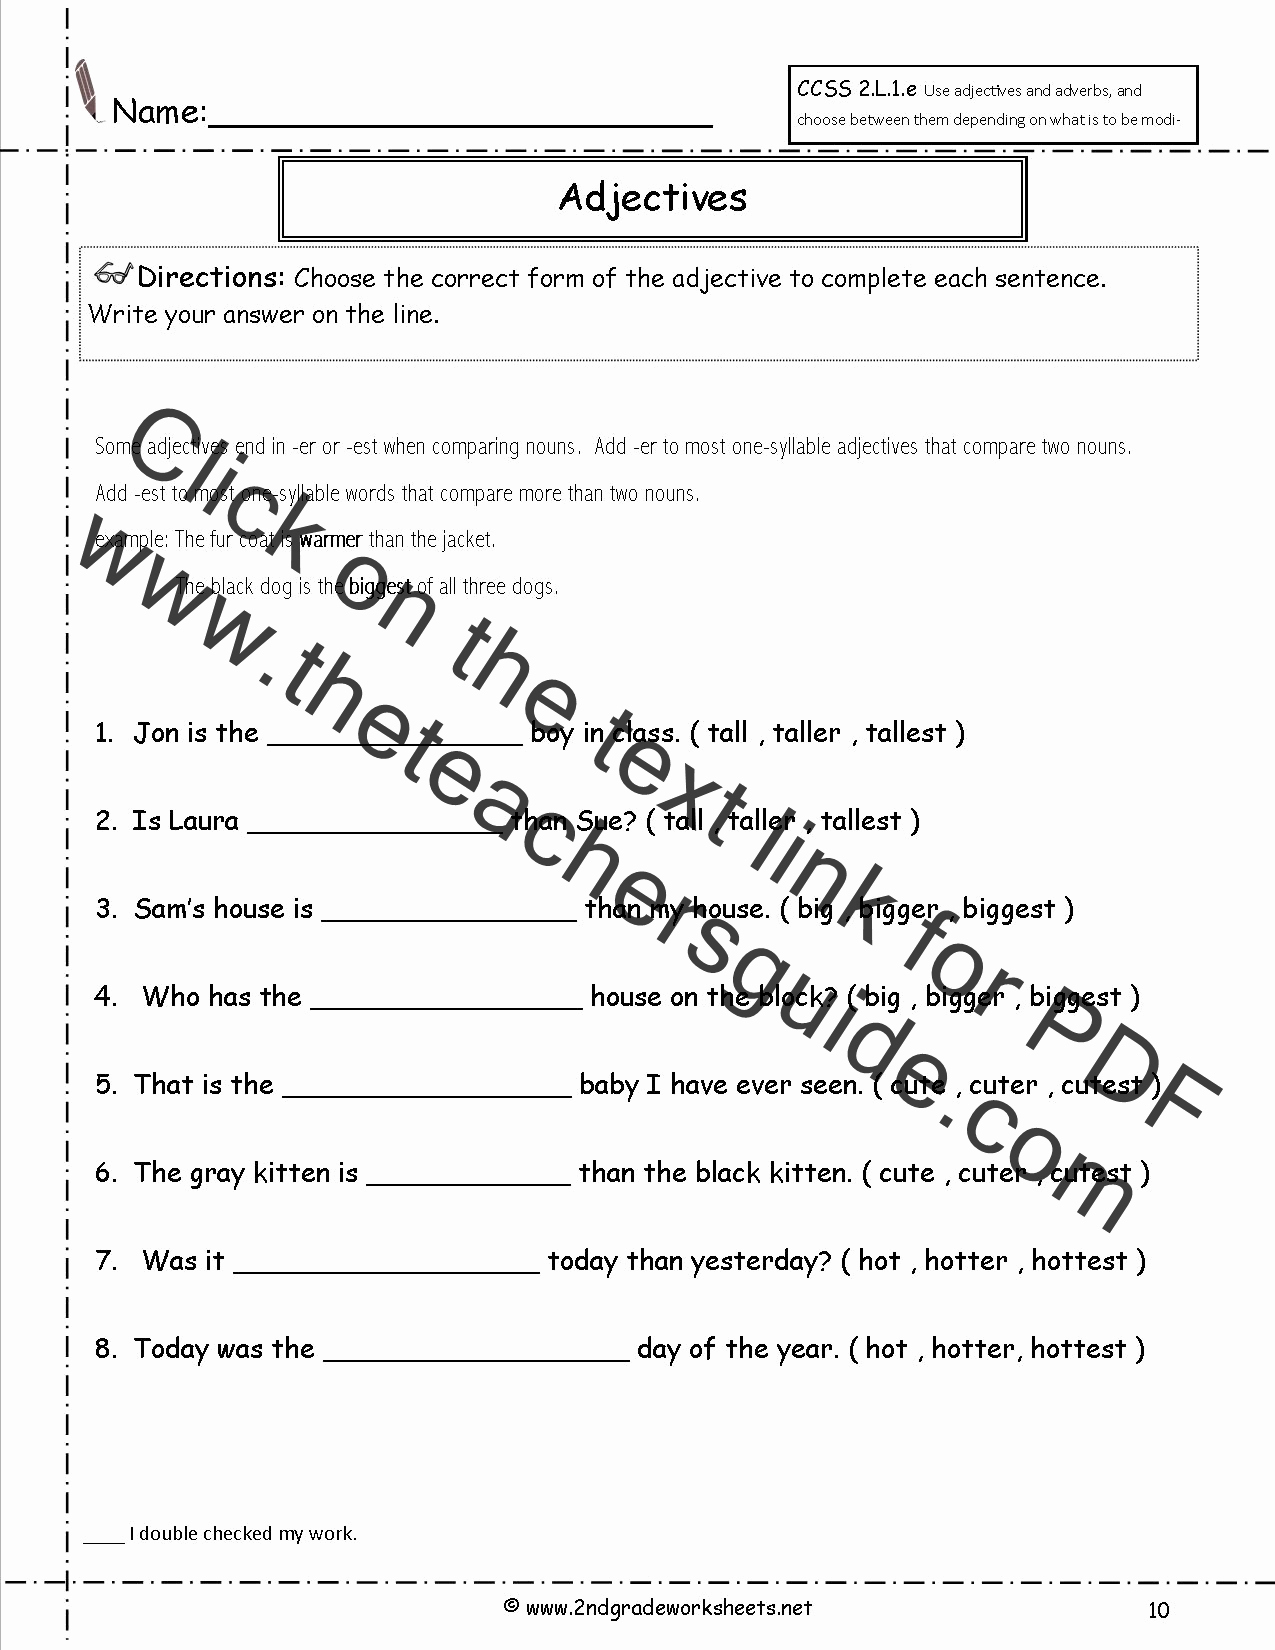 3rd Grade Adjectives Worksheets Luxury Adjective Worksheets 3rd Grade Pdf Download Worksheet